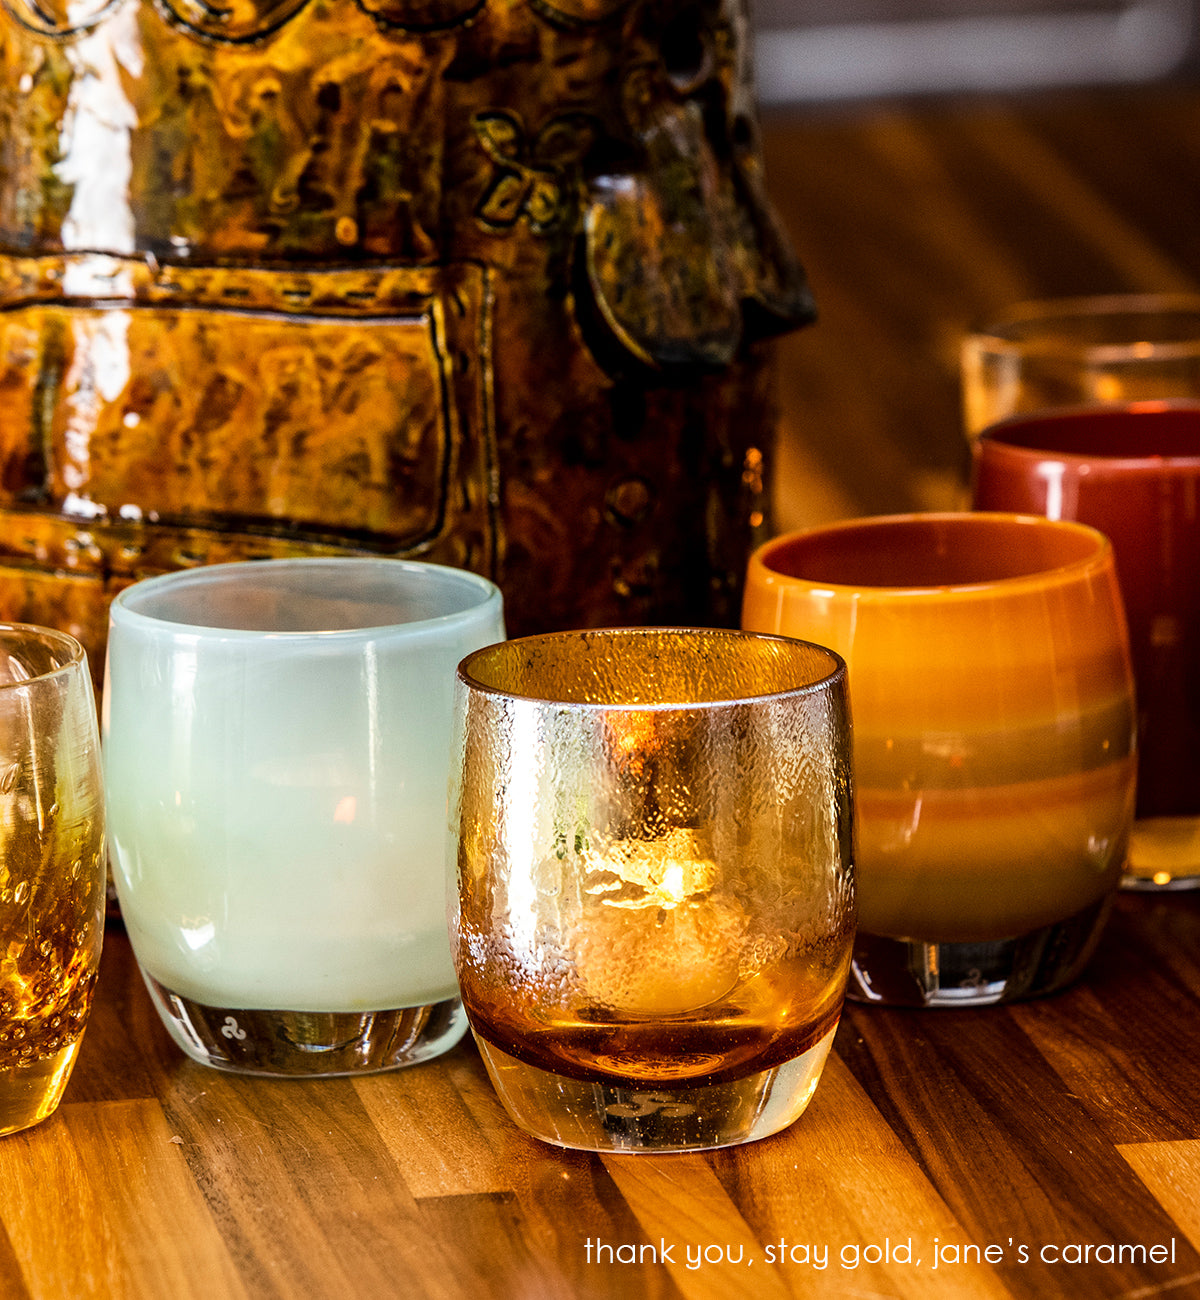 stay gold is a beautiful golden hand-blown glass candle-holder. it's beautiful glow inspires you to stay gold and glow from within.